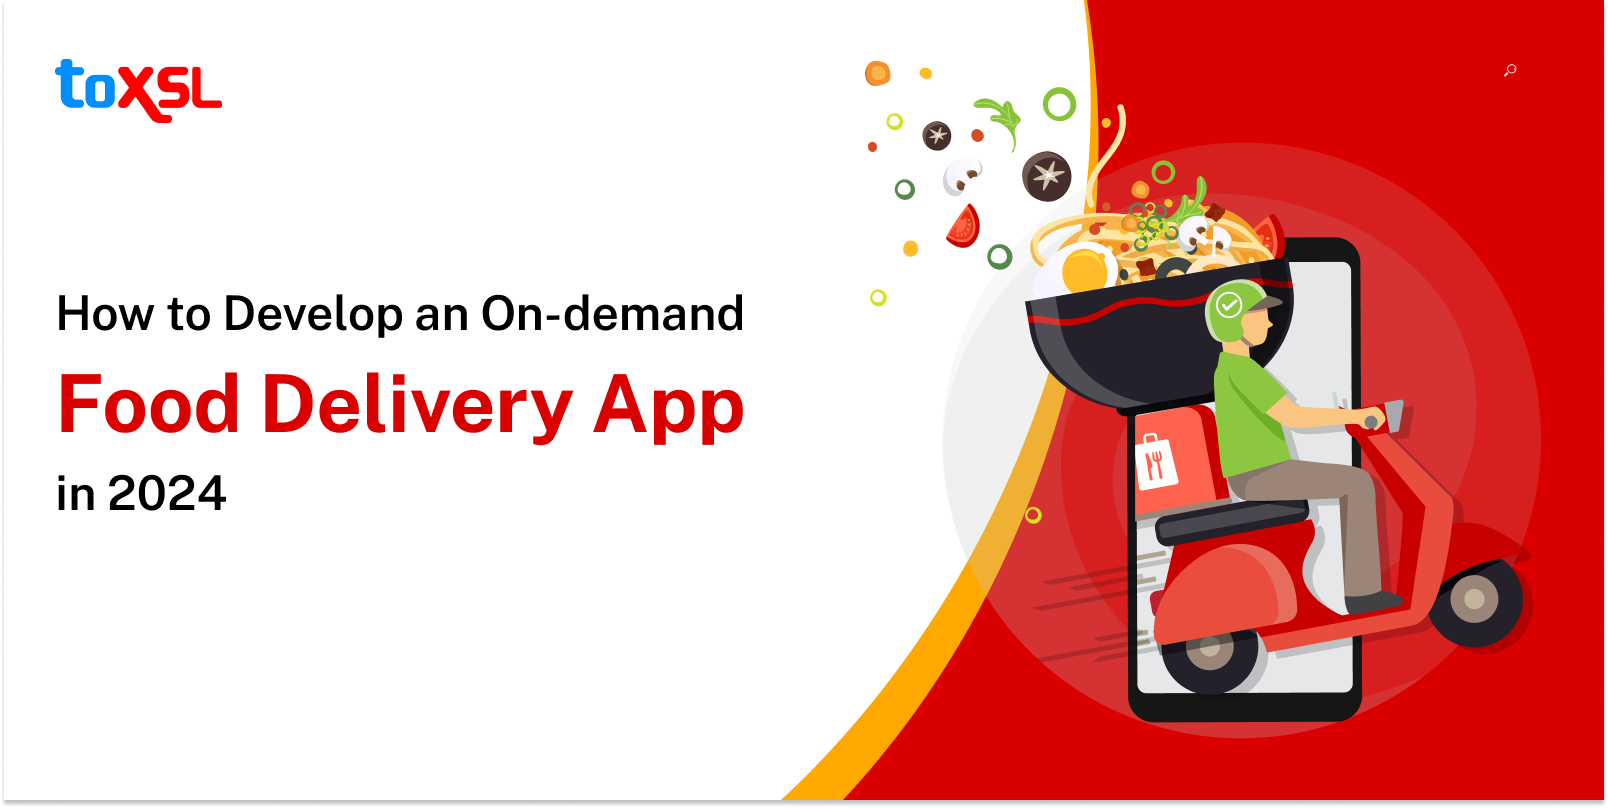 How to Develop an On-demand Food Delivery App in 2024